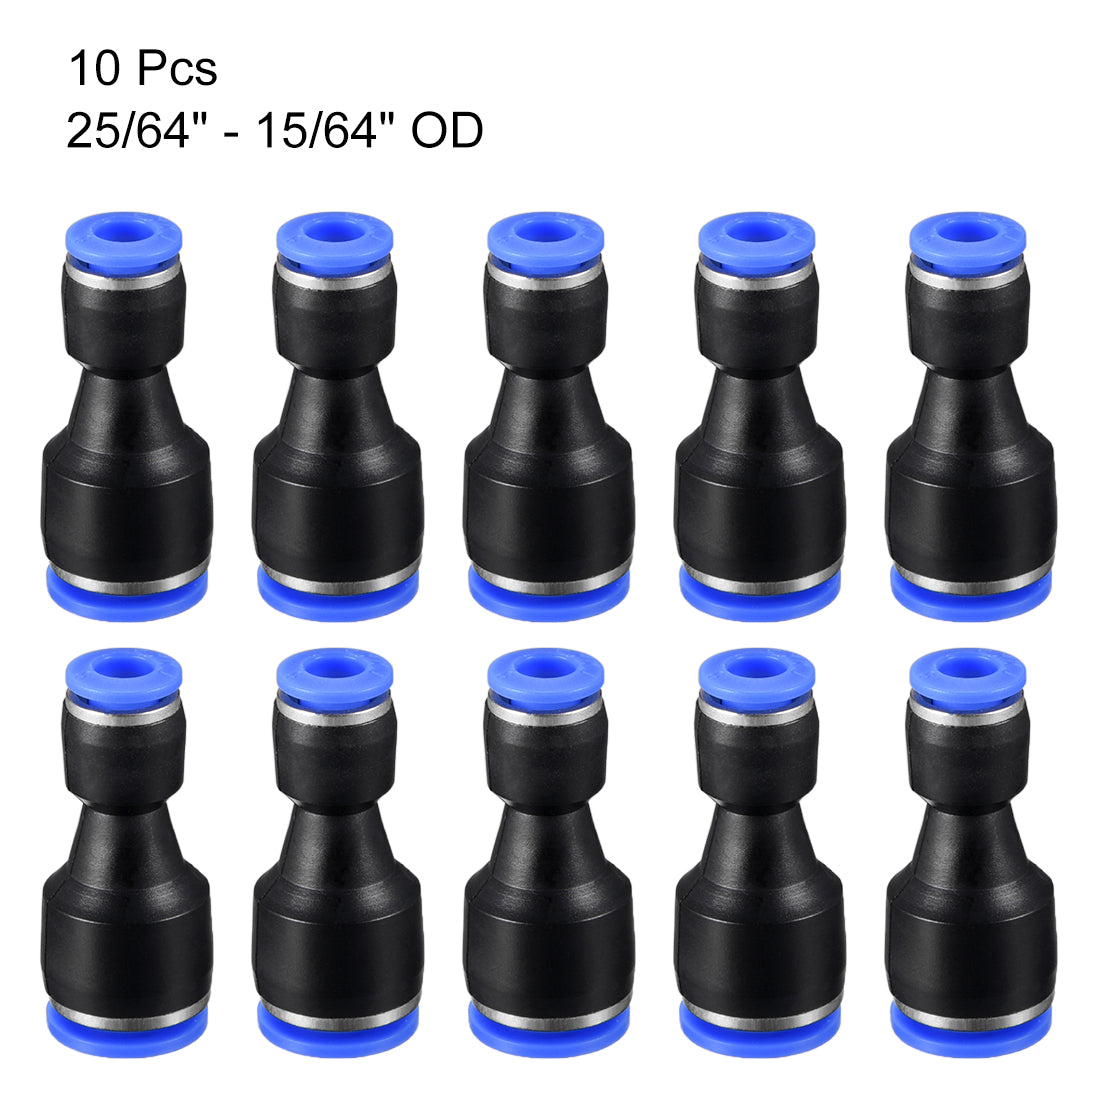 uxcell Uxcell 10pcs Push to Connect Fittings Tube Connect  25/64" to 15/64" Straight OD Push Fit Fittings Tube Fittings Push Lock Blue